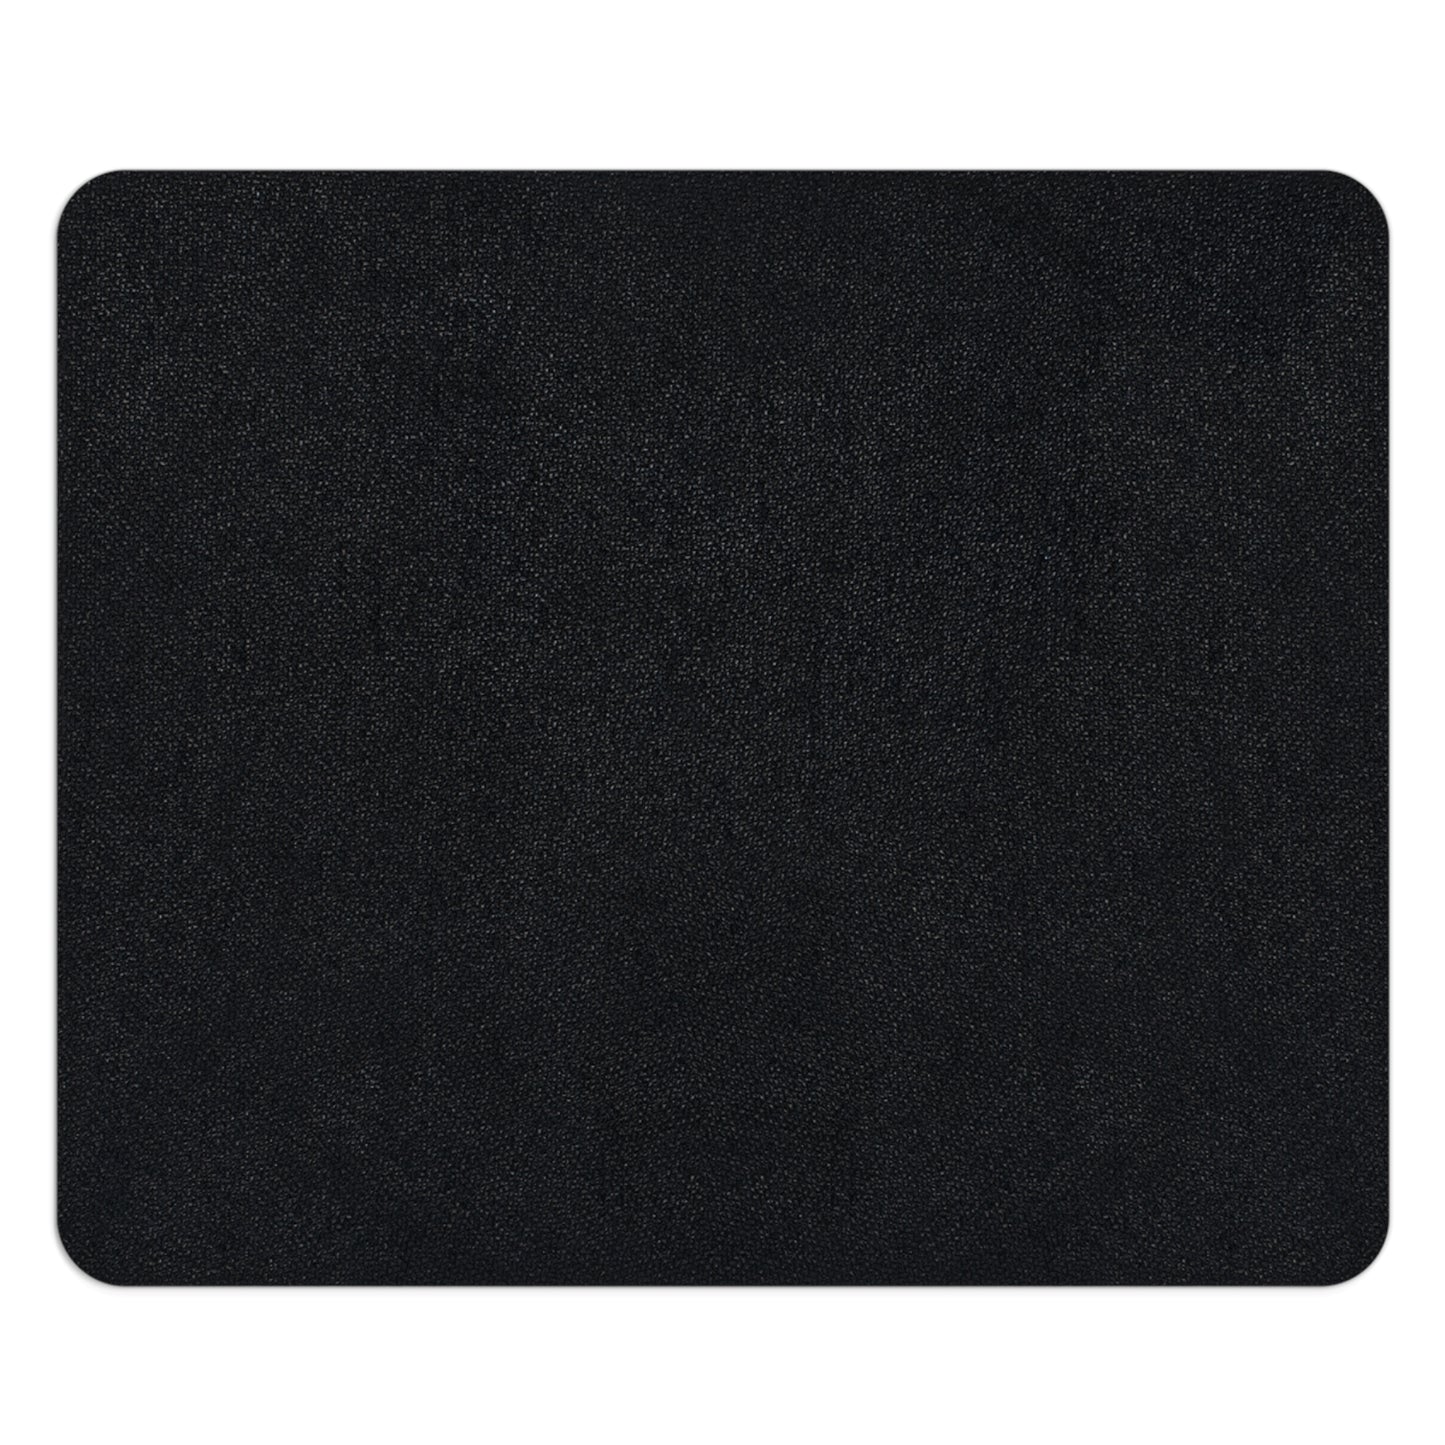 Mouse Pad Perky Yellow